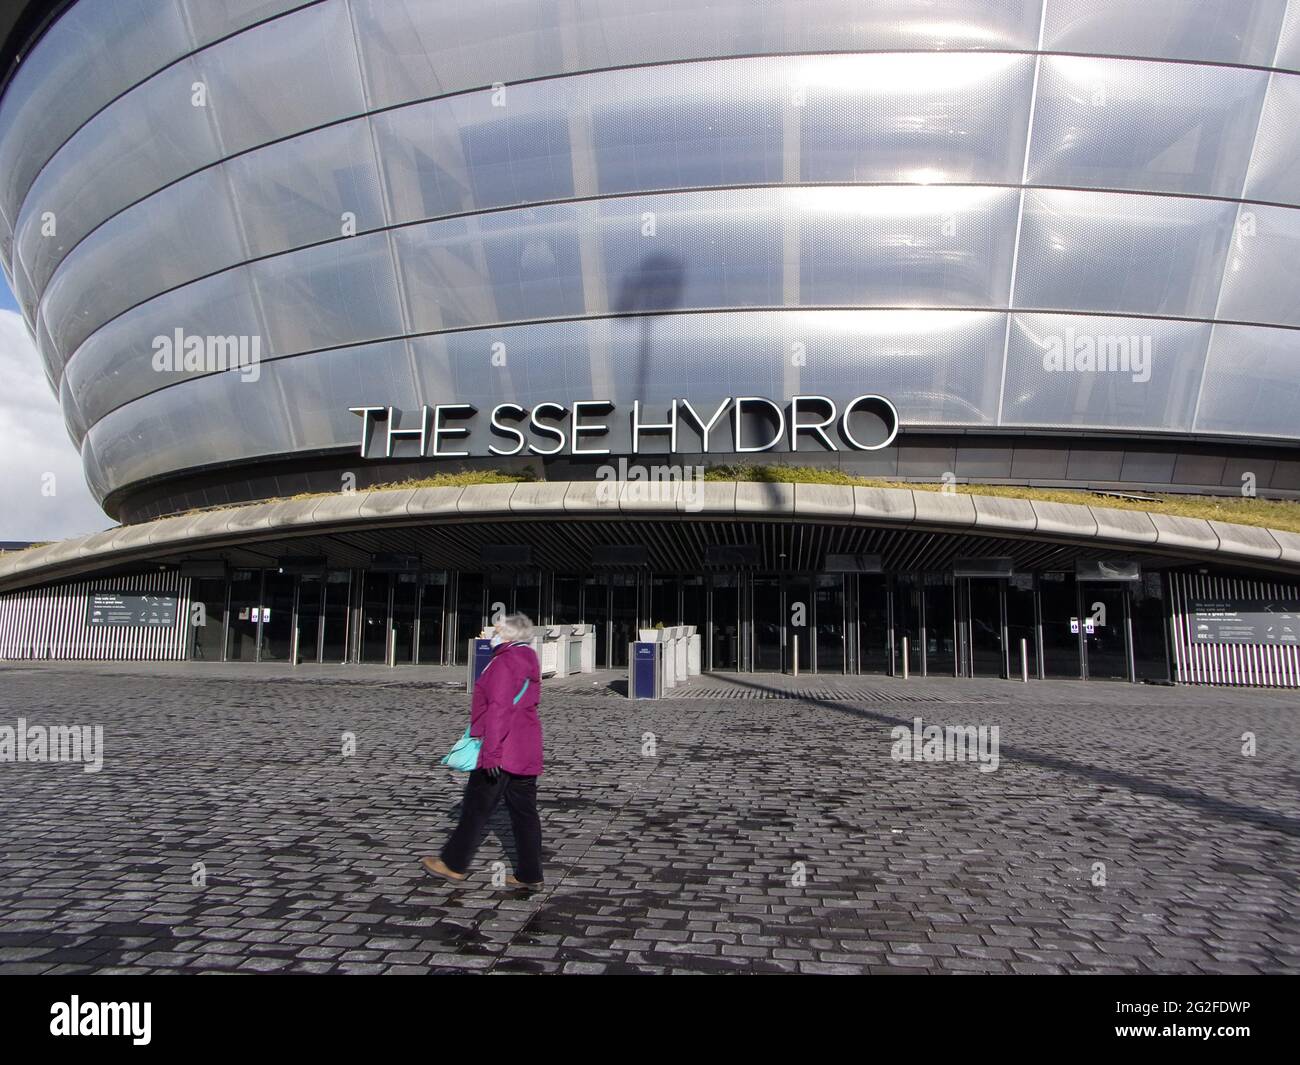 This building, looking a bit like a flying saucer, is The Hyrdo music and events building in Glasgow. It's huge, cavernous interior can hold up to 12,000 people. In 2021 it was turned into a NHS vaccination centre to vaccinate the people of Glasgow against the Covid virus. ALAN WYLIE/ALAMY© Stock Photo